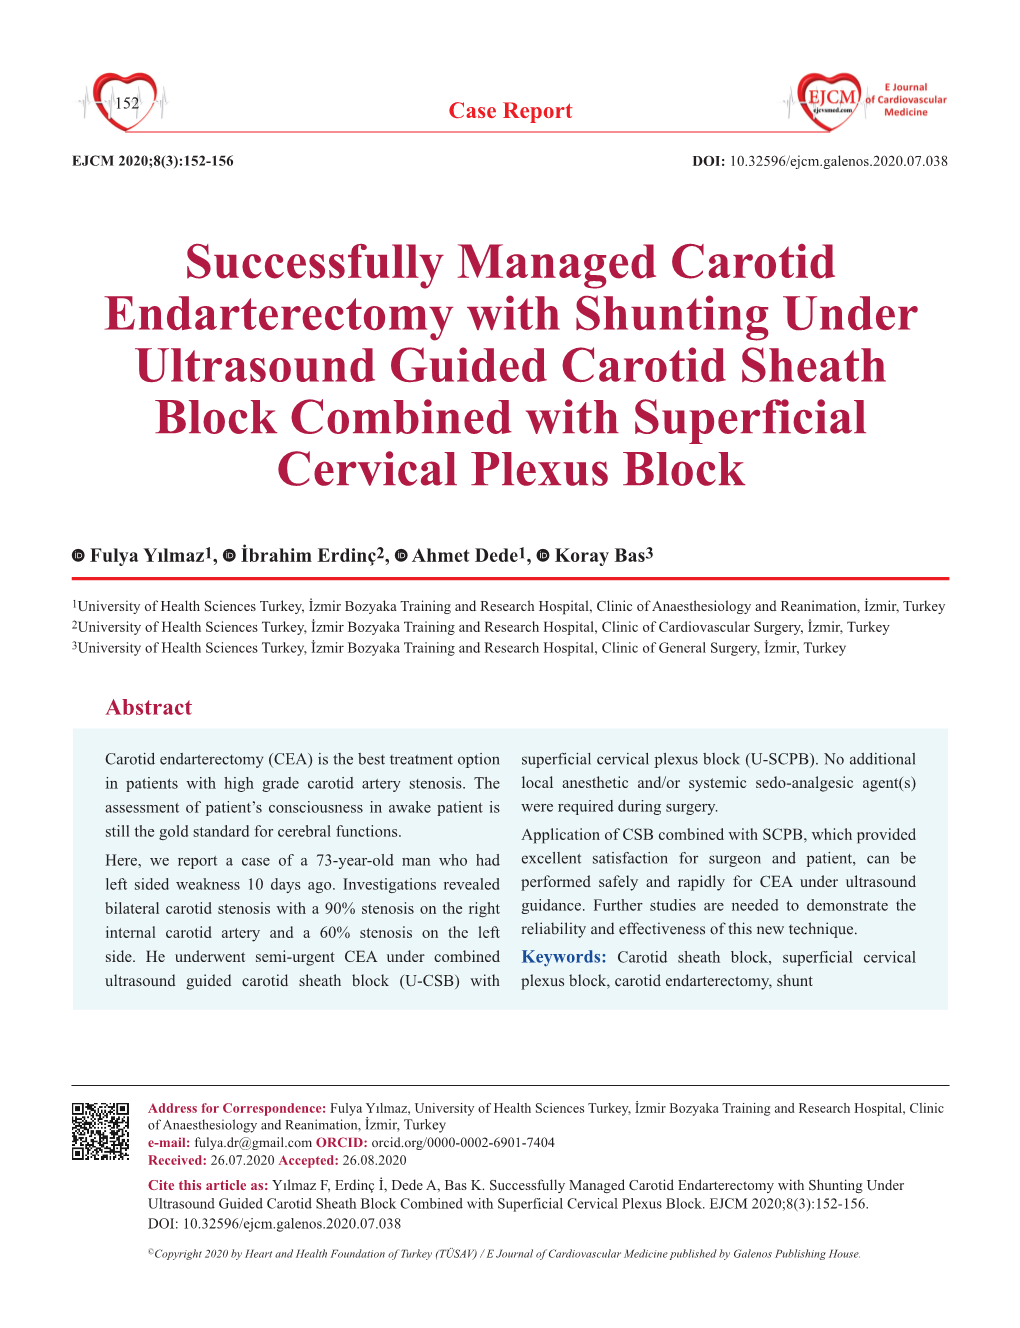 Successfully Managed Carotid Endarterectomy with Shunting Under Ultrasound Guided Carotid Sheath Block Combined with Superficial Cervical Plexus Block